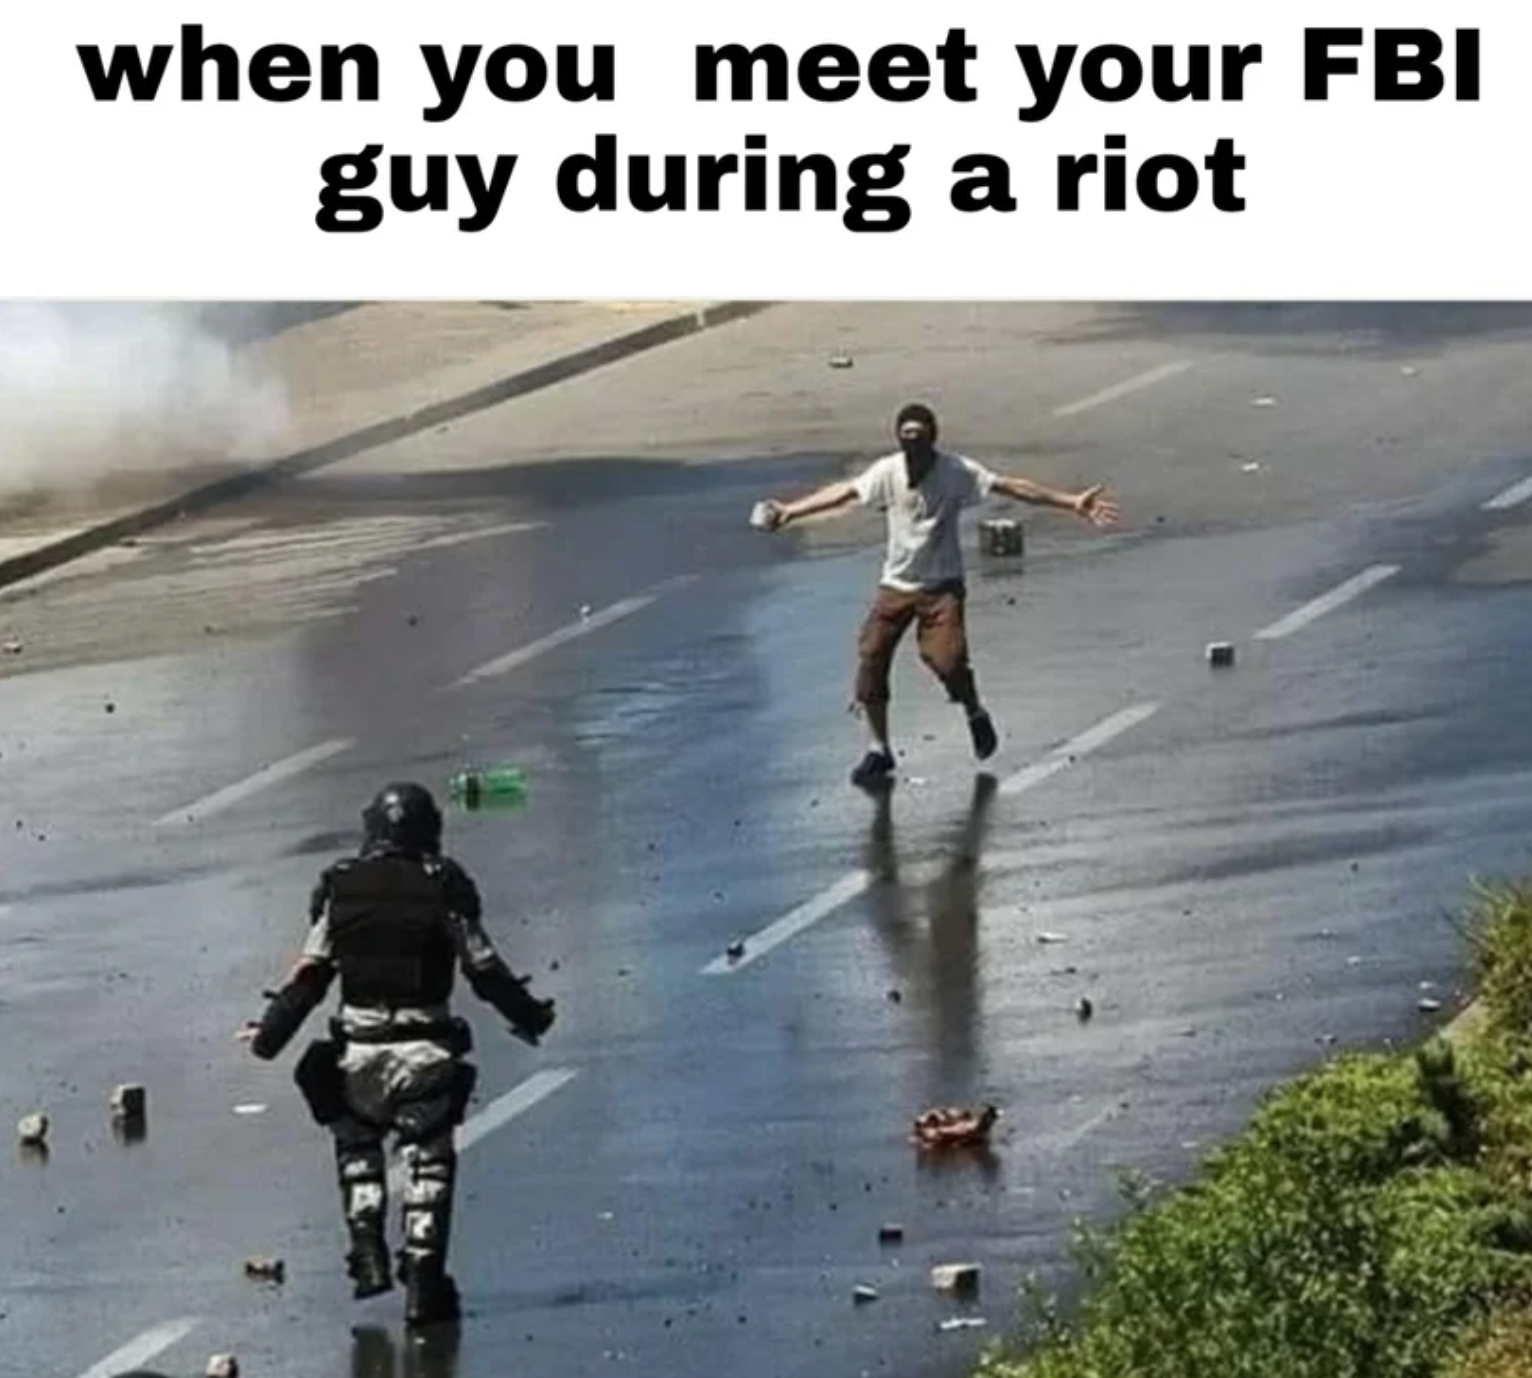 photo caption - when you meet your Fbi guy during a riot